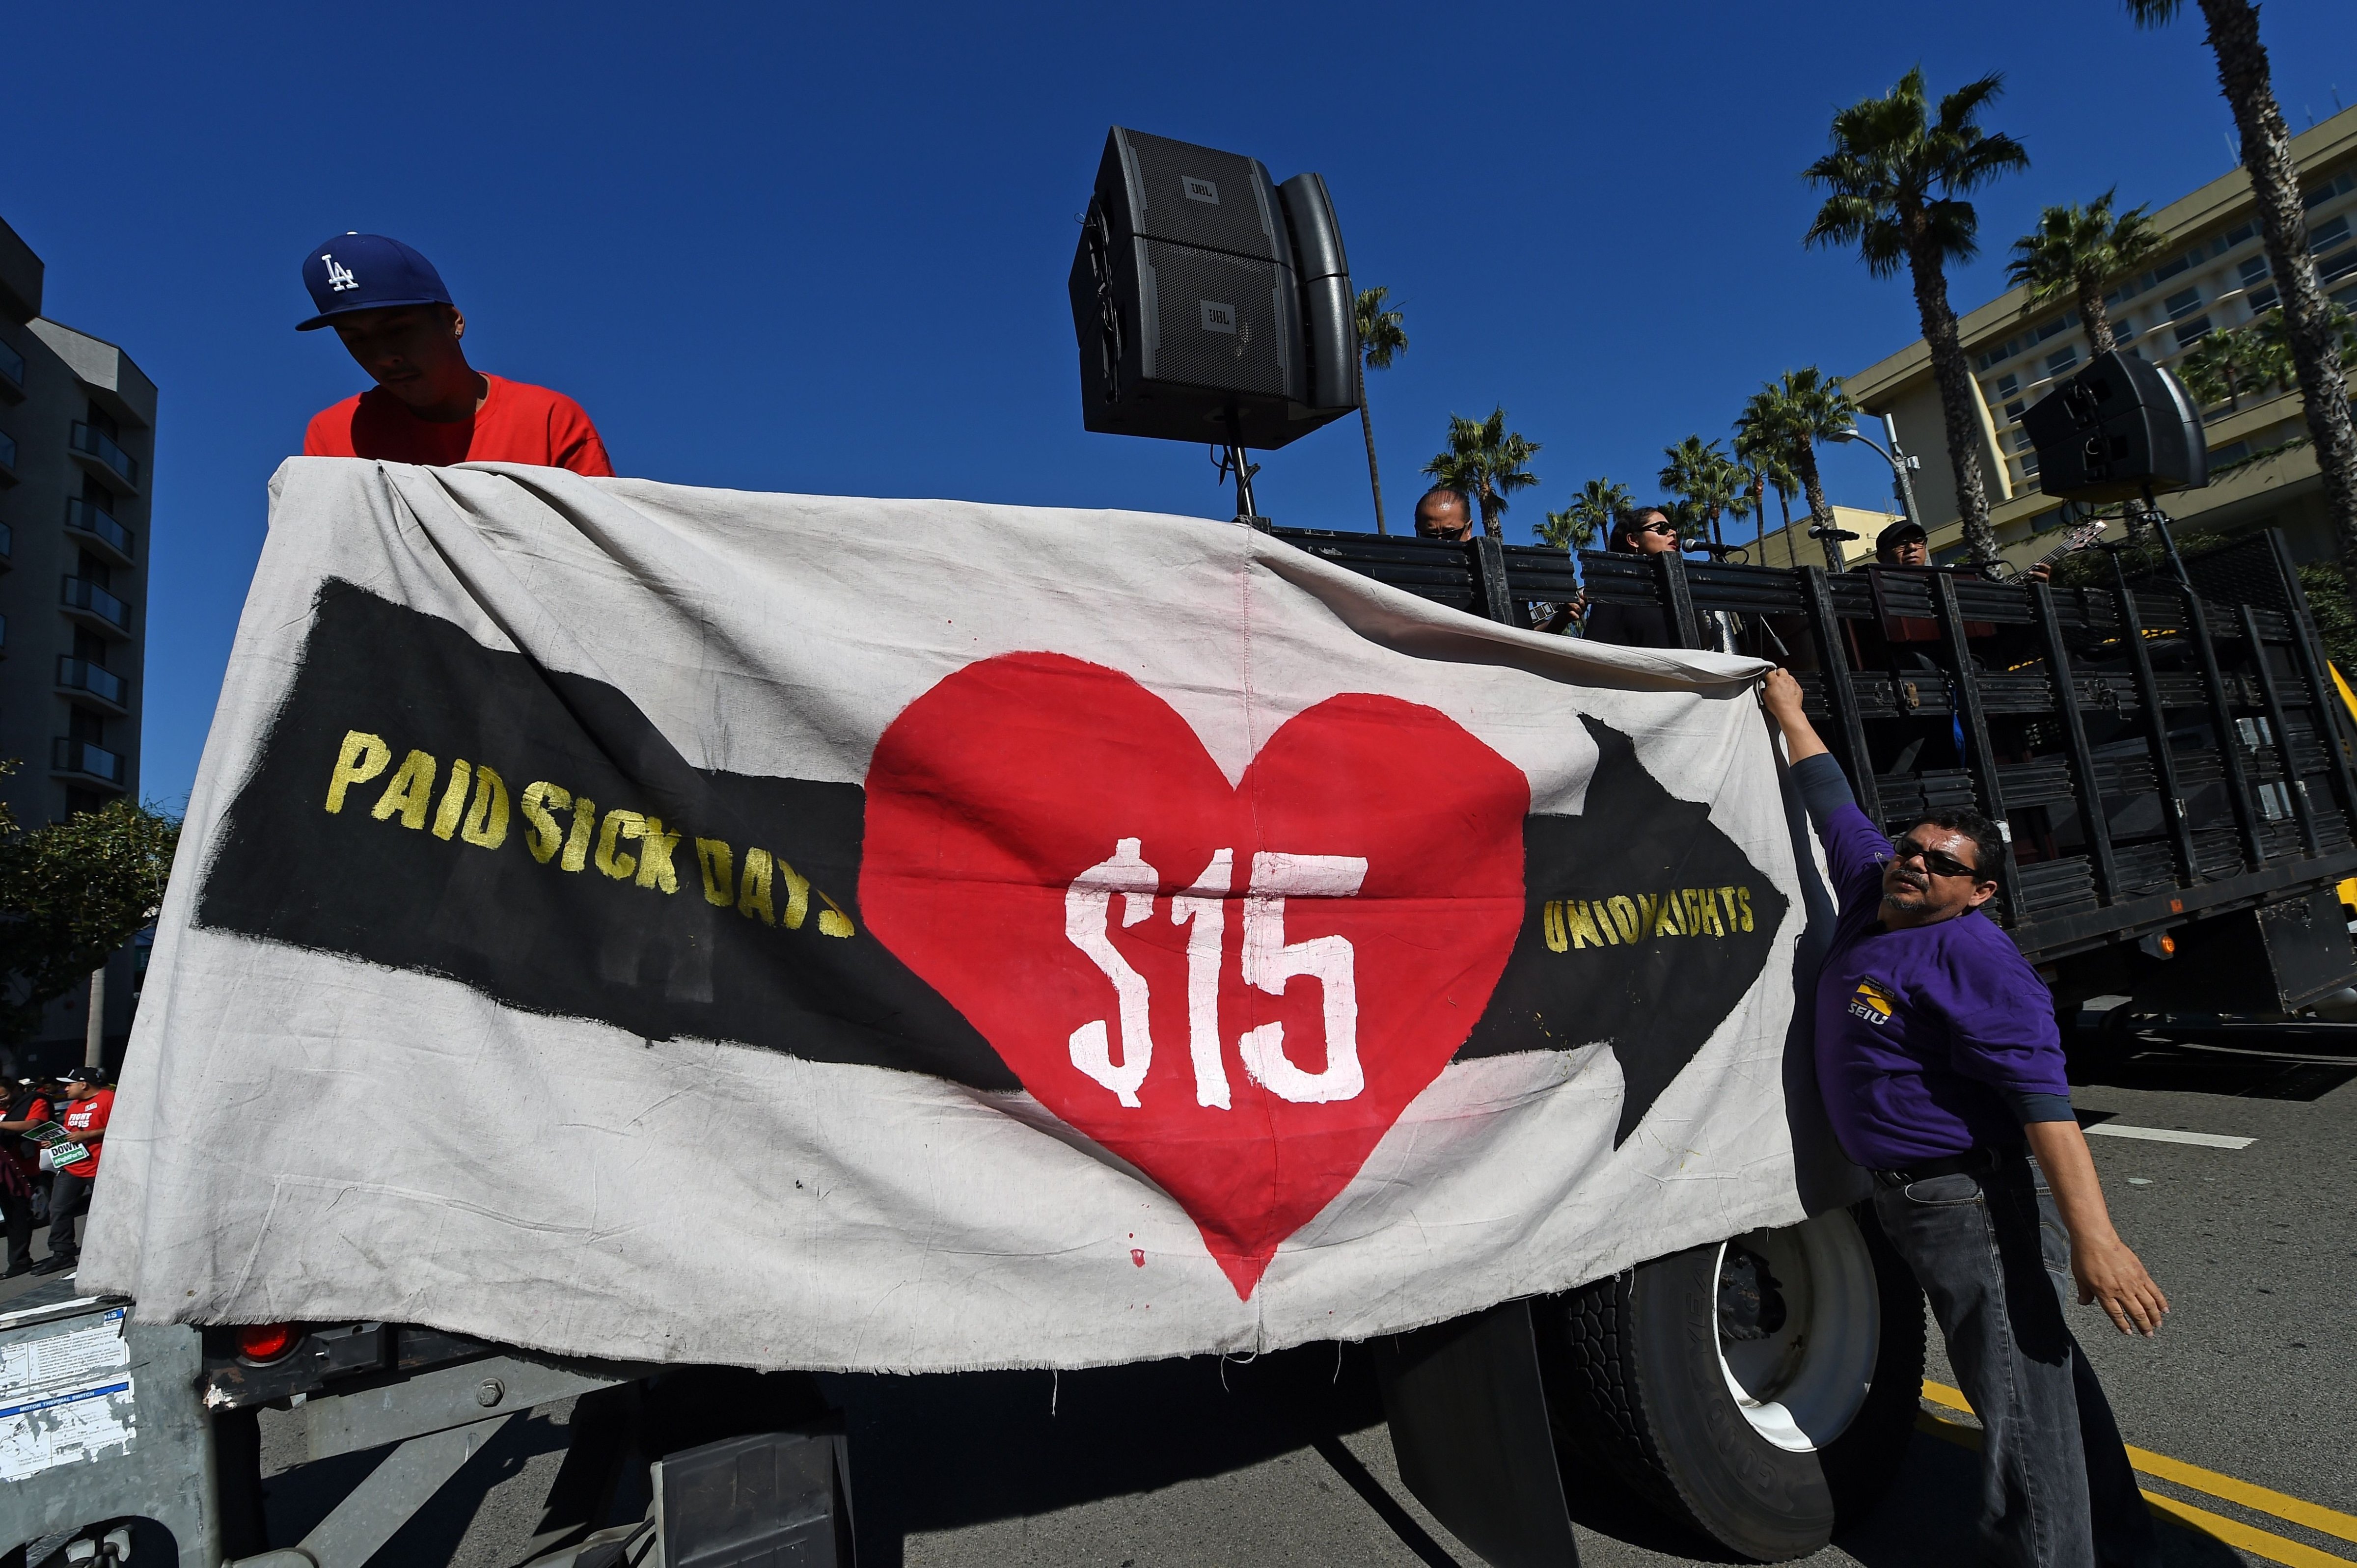 Union workers and supporters participate in a "Fight for $15" wage protest at Los Angeles International Airport in Los Angeles, California, November 29, 2016. (Robyn Beck—AFP/Getty Images)